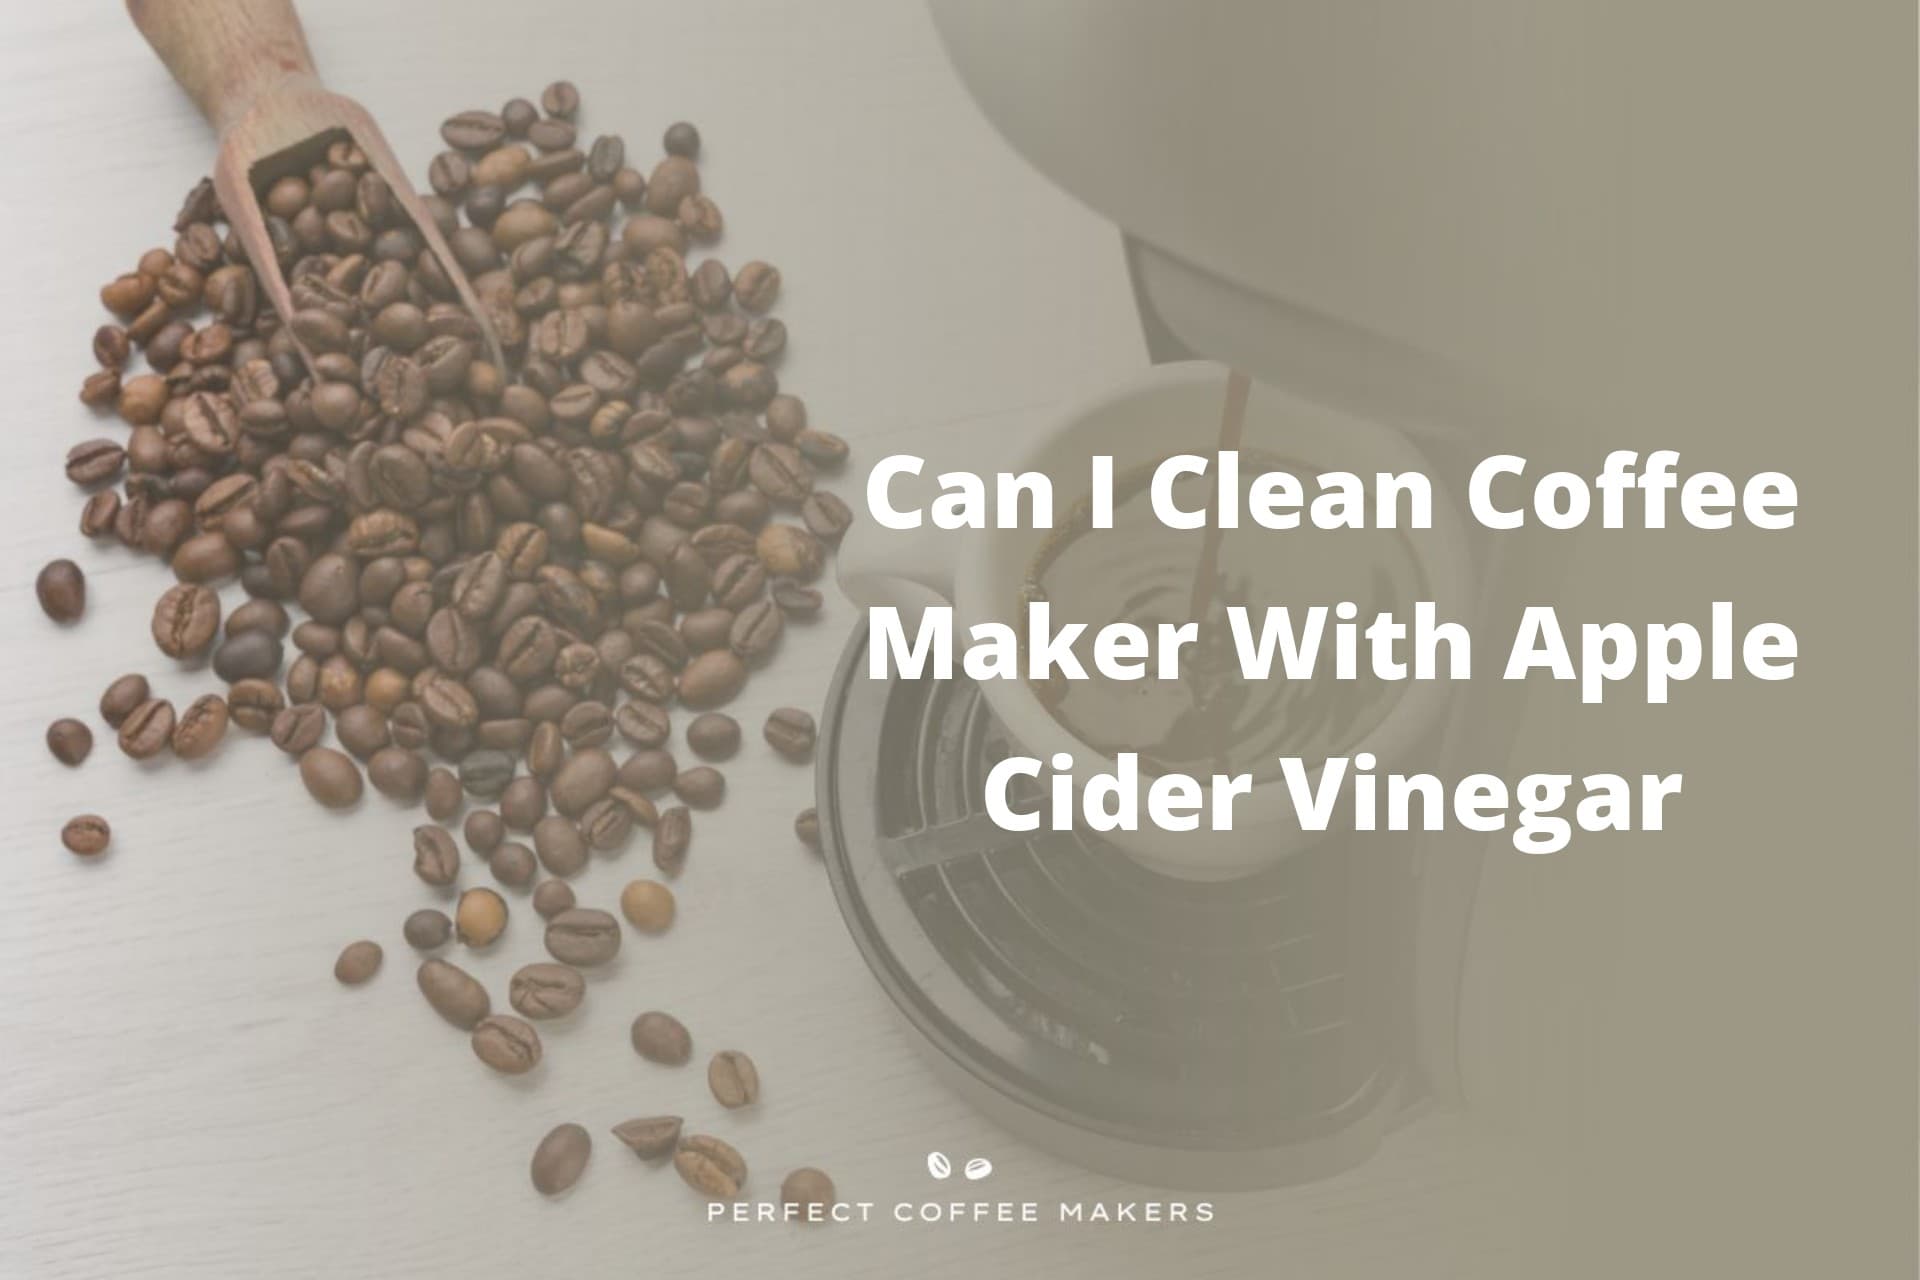 Can I Clean Coffee Maker With Apple Cider Vinegar